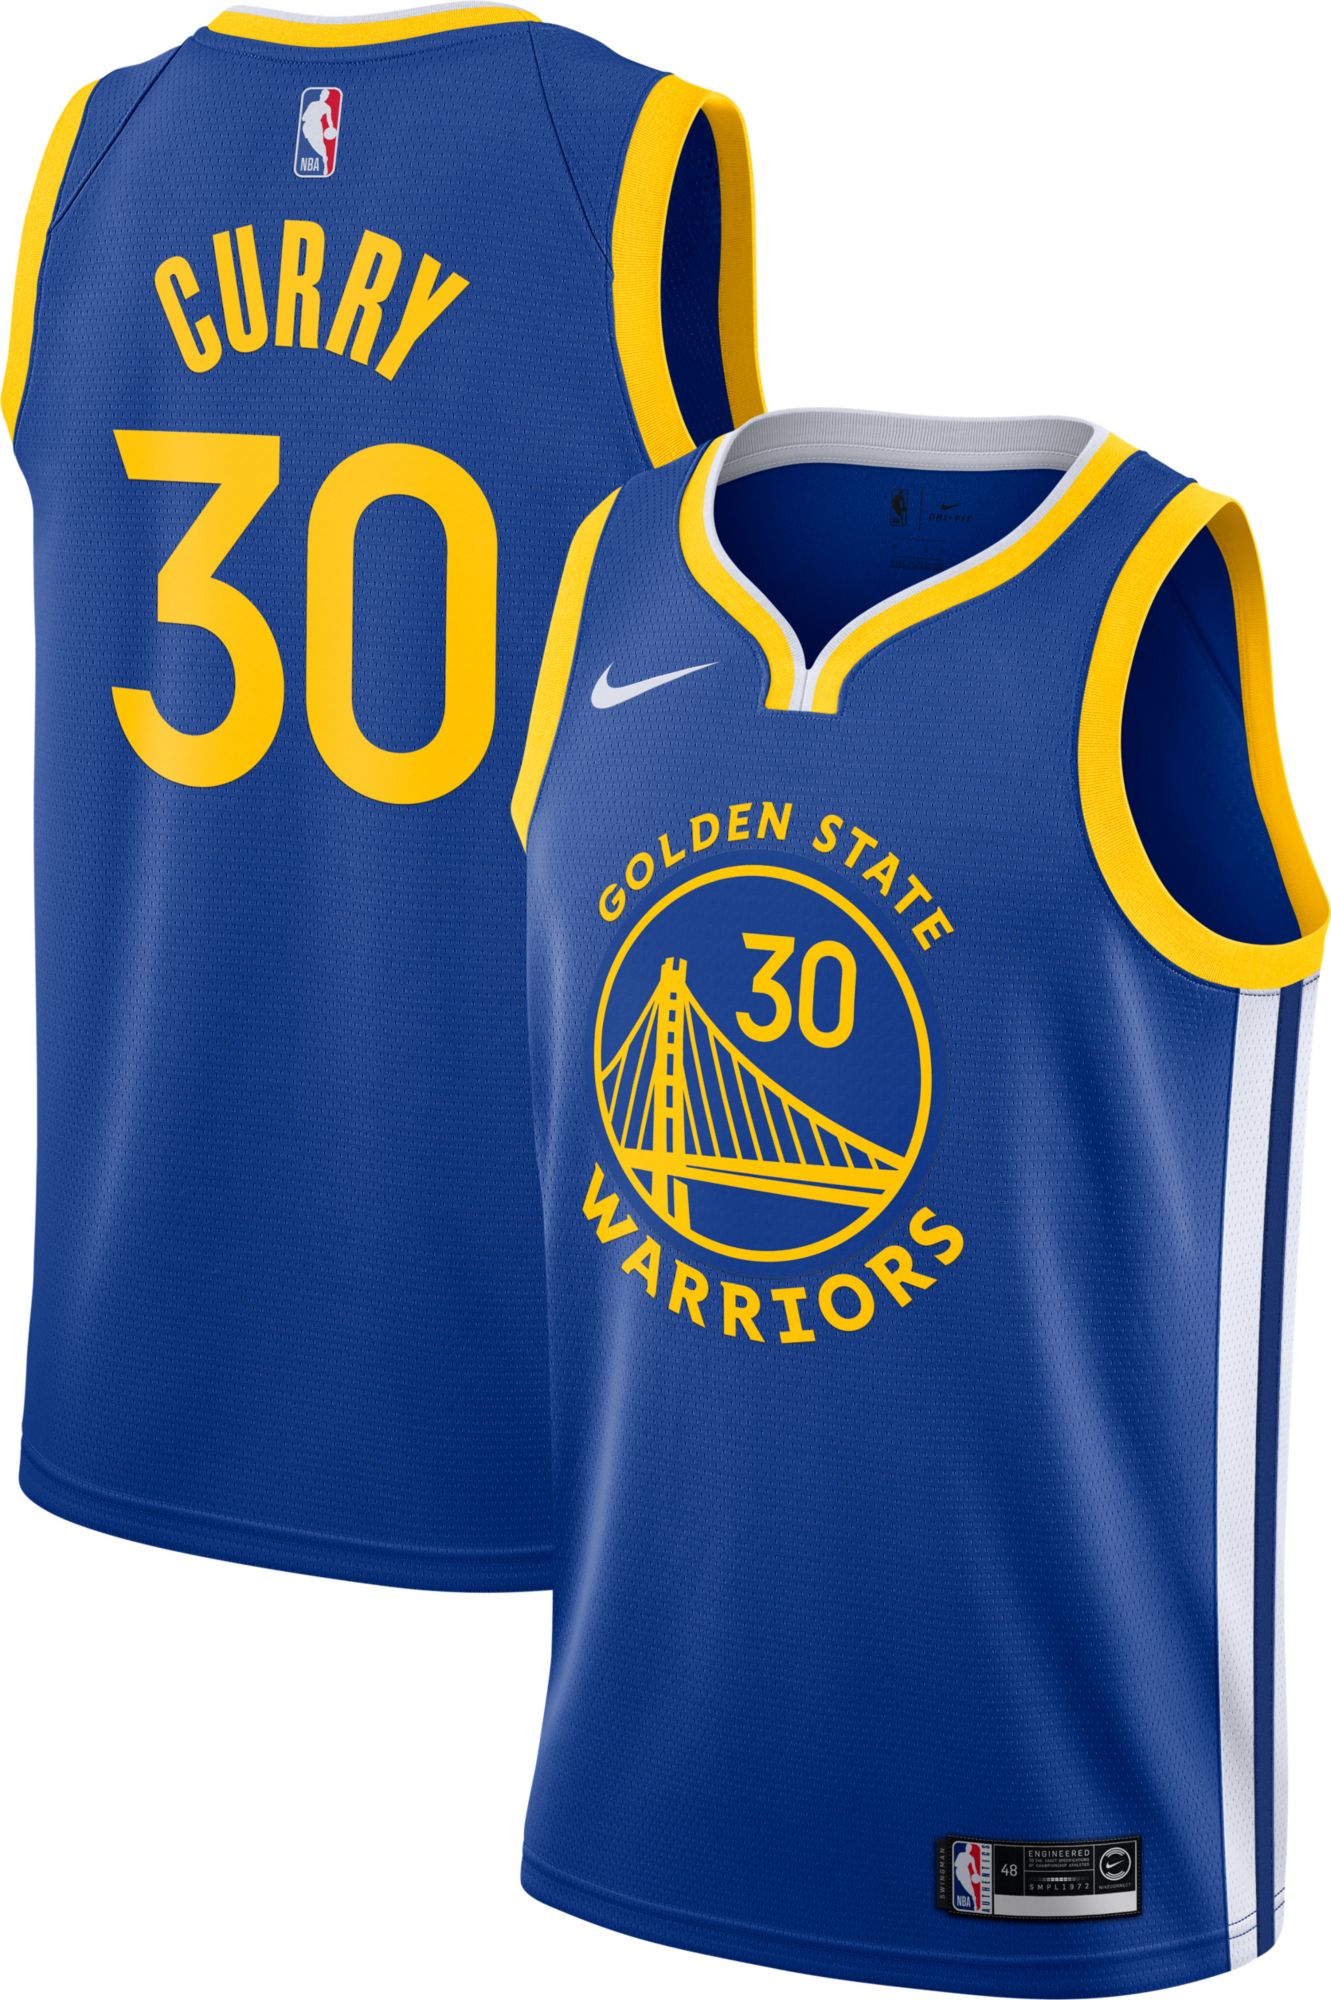 curry the bay jersey